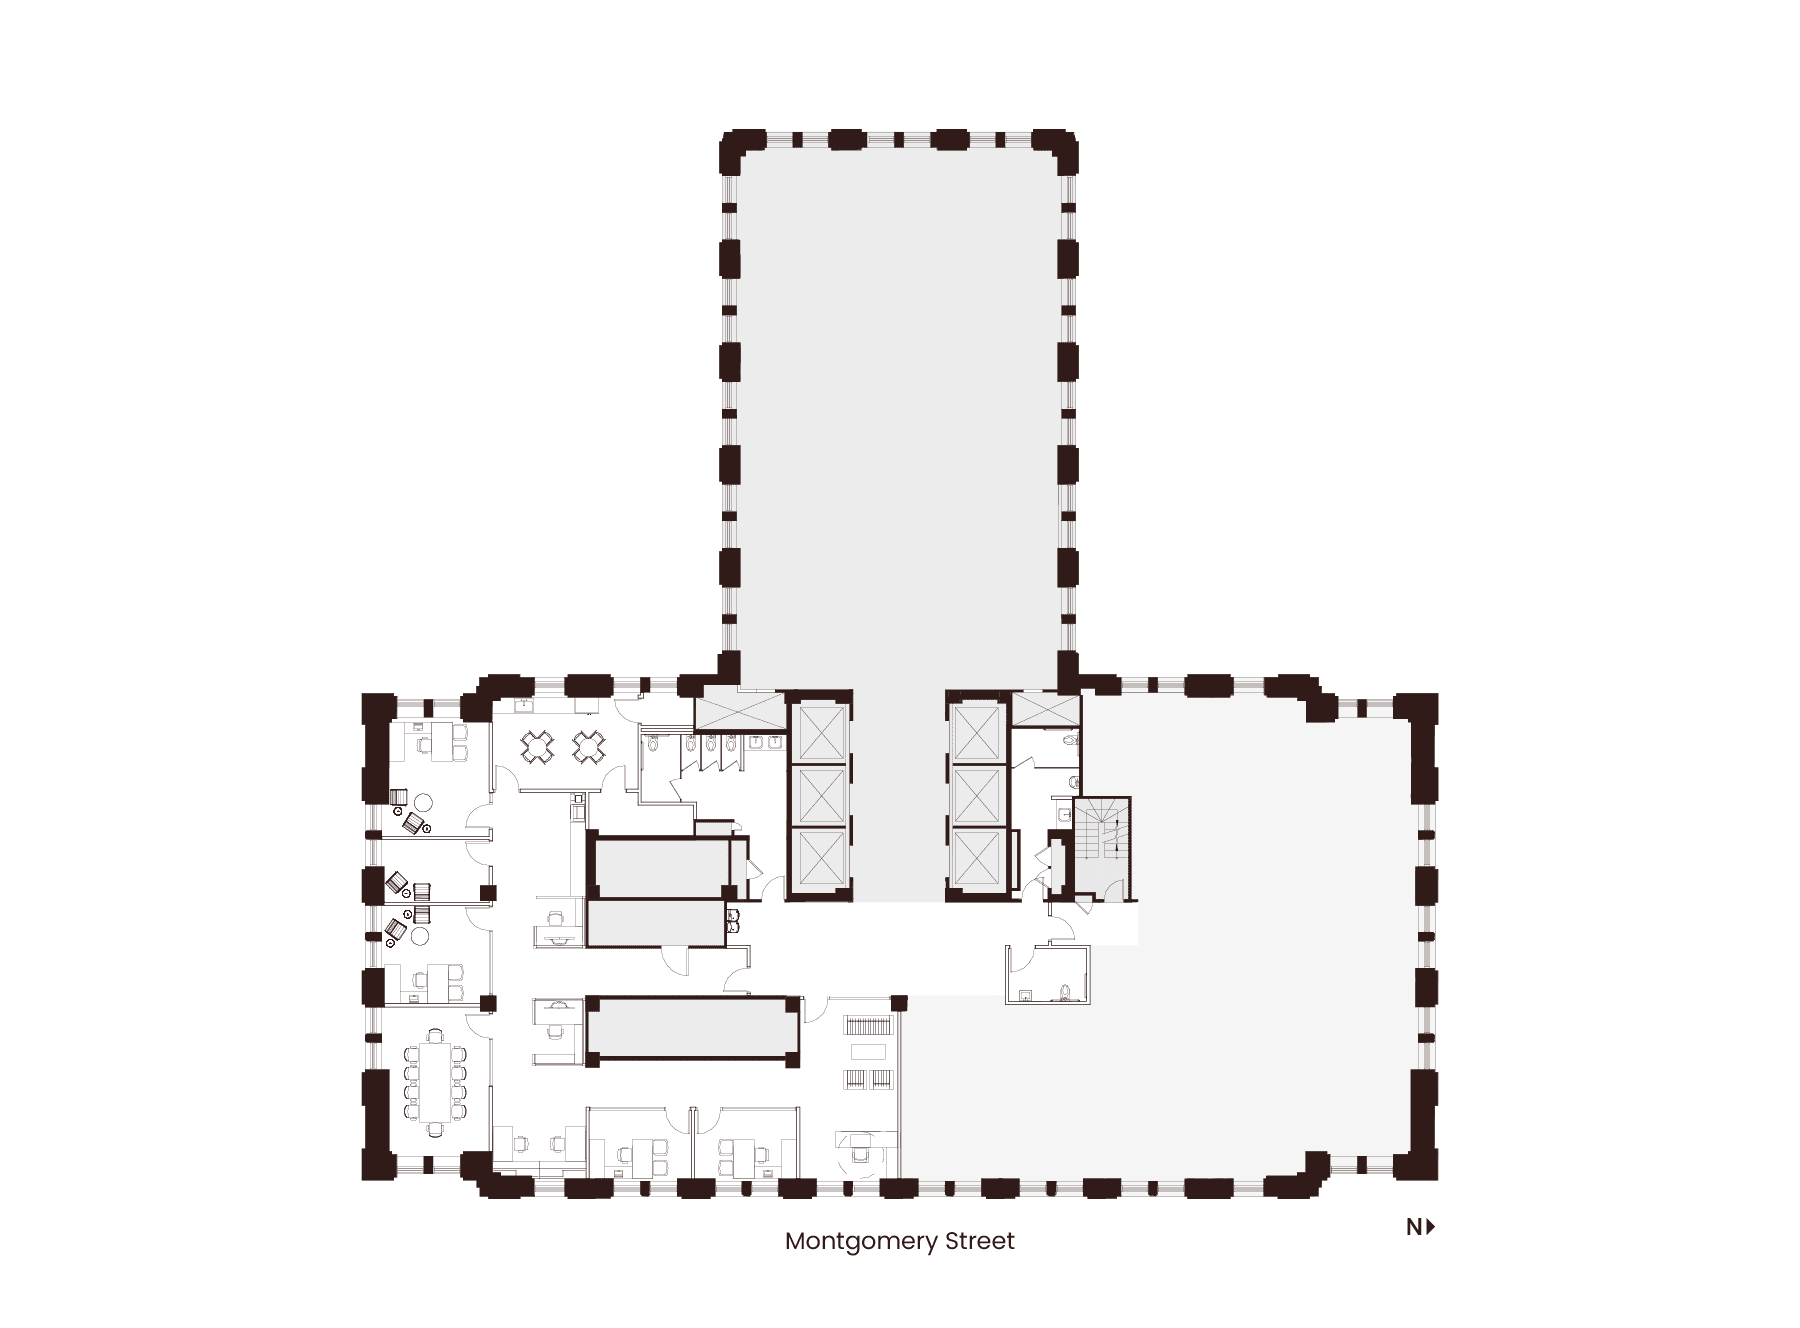 Floor 18 Suite 1820 Hypothetical Private Office Layout